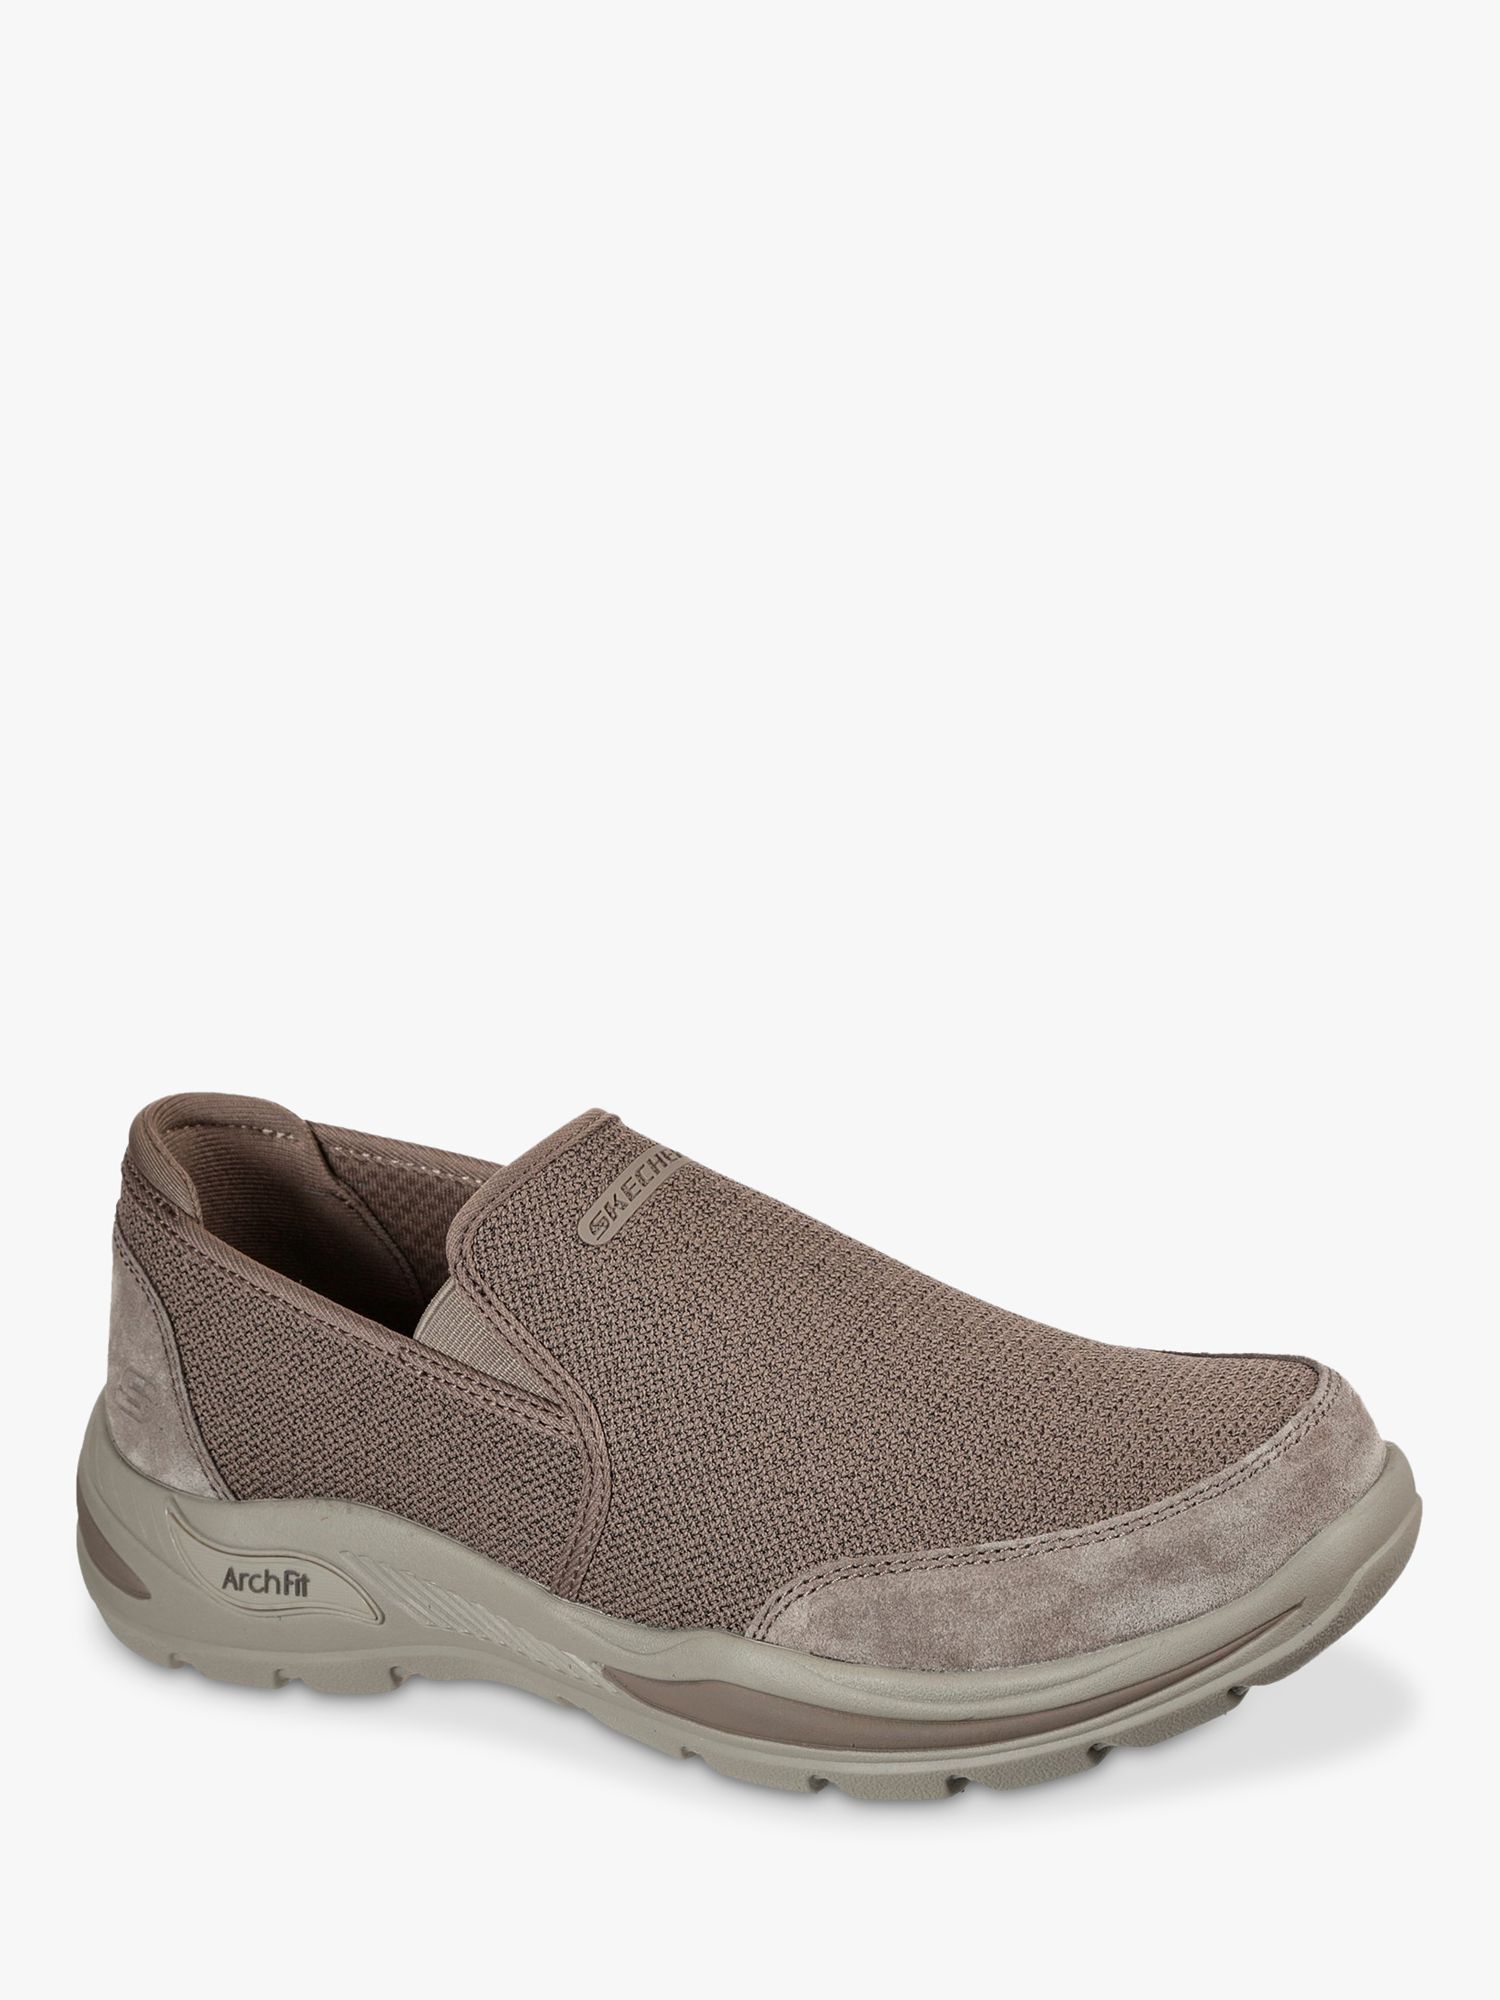 Skechers Relaxed Fit Arch Fit Motley Ratel Slip On Trainers, Light ...